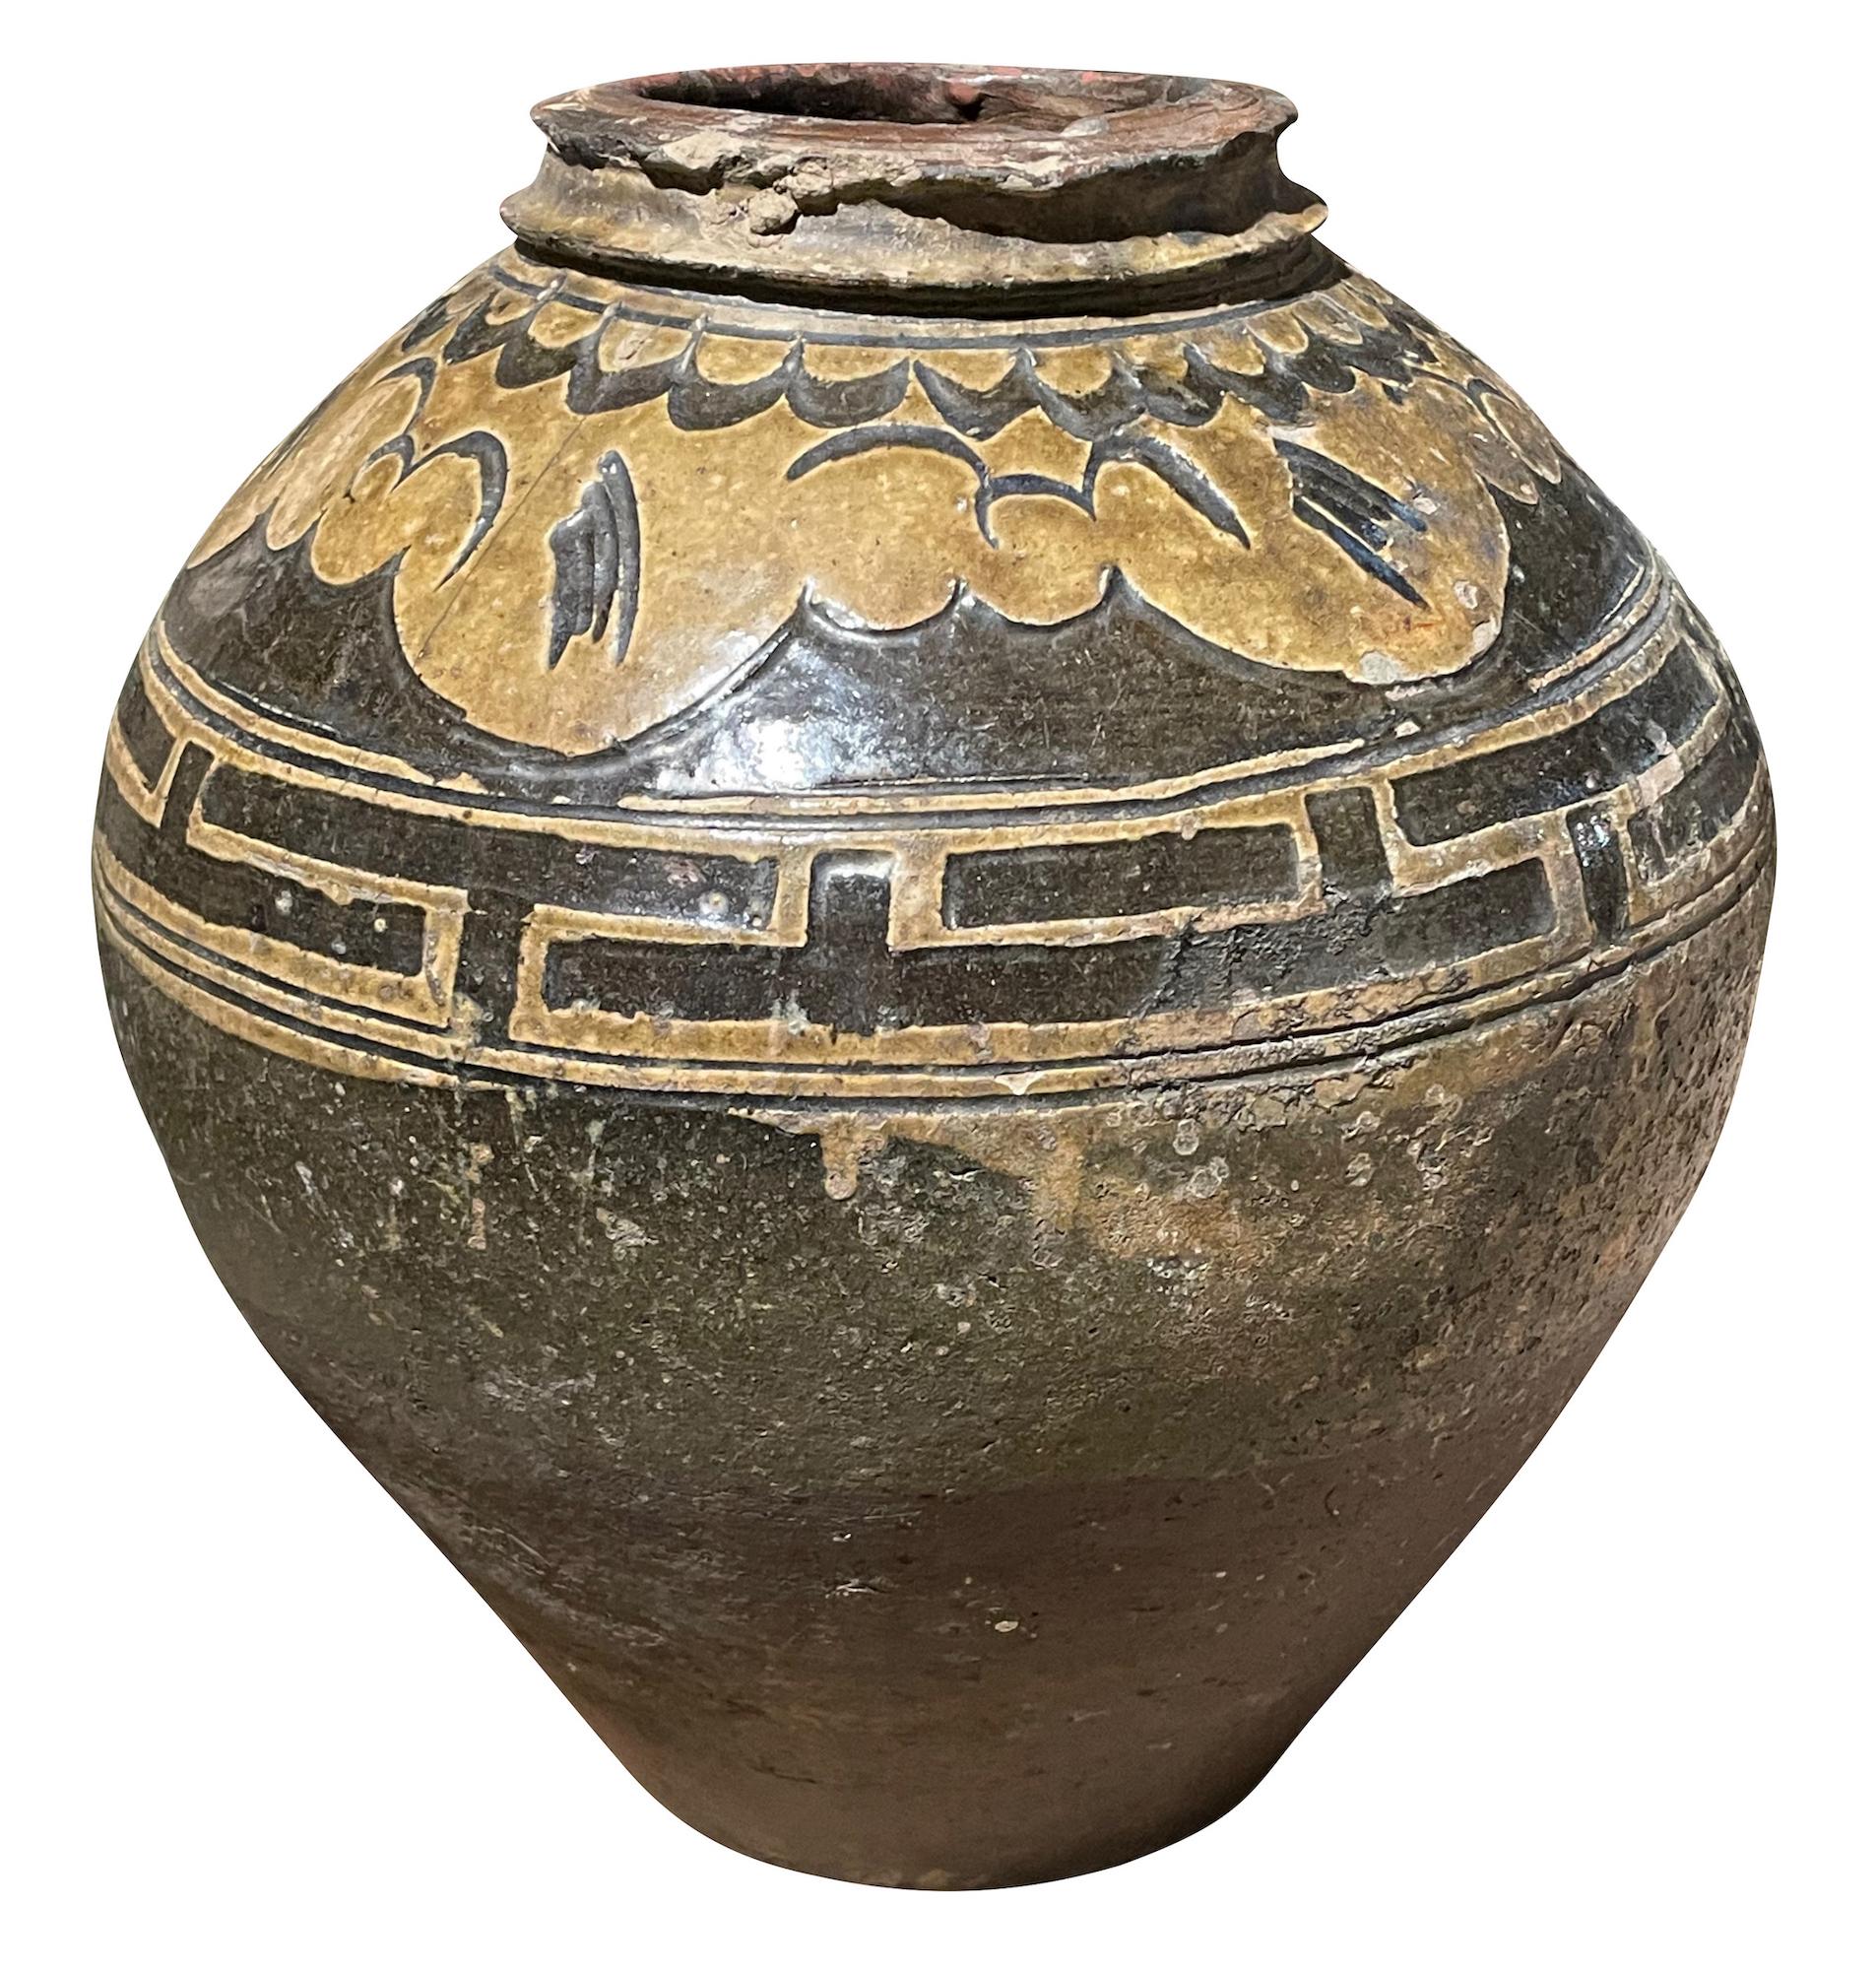 19th century Chinese round shaped vase in traditional olive and gold glaze.
Natural aged patina and wear.
Decorative geometric design.
Part of a large collection.
ARRIVING APRIL